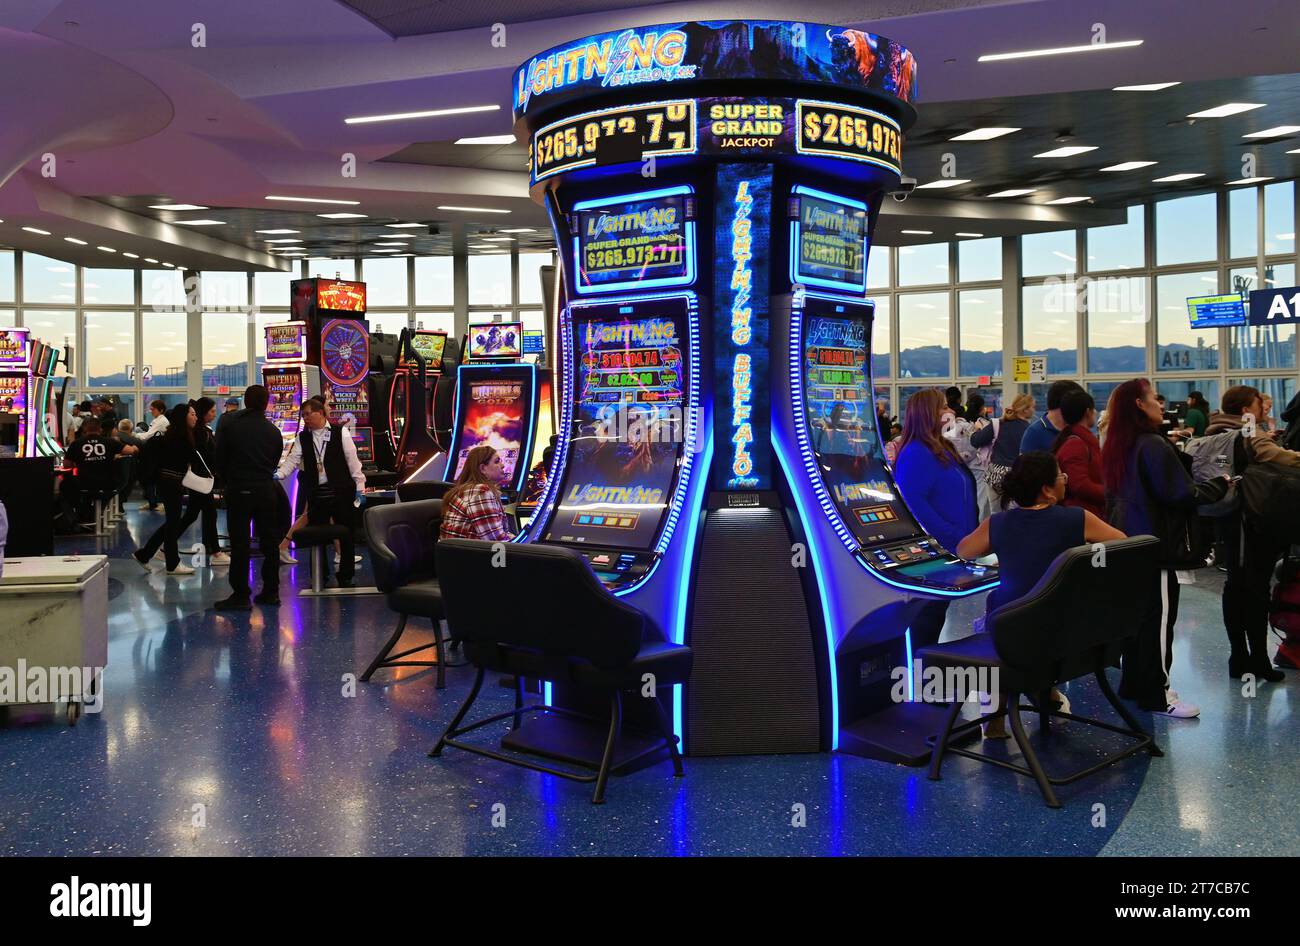 Las Vegas, Nevada, USA. Passengers waiting for flights at Harry Reid International Airport have the opportunity to try their luck at gambling machines. Stock Photo